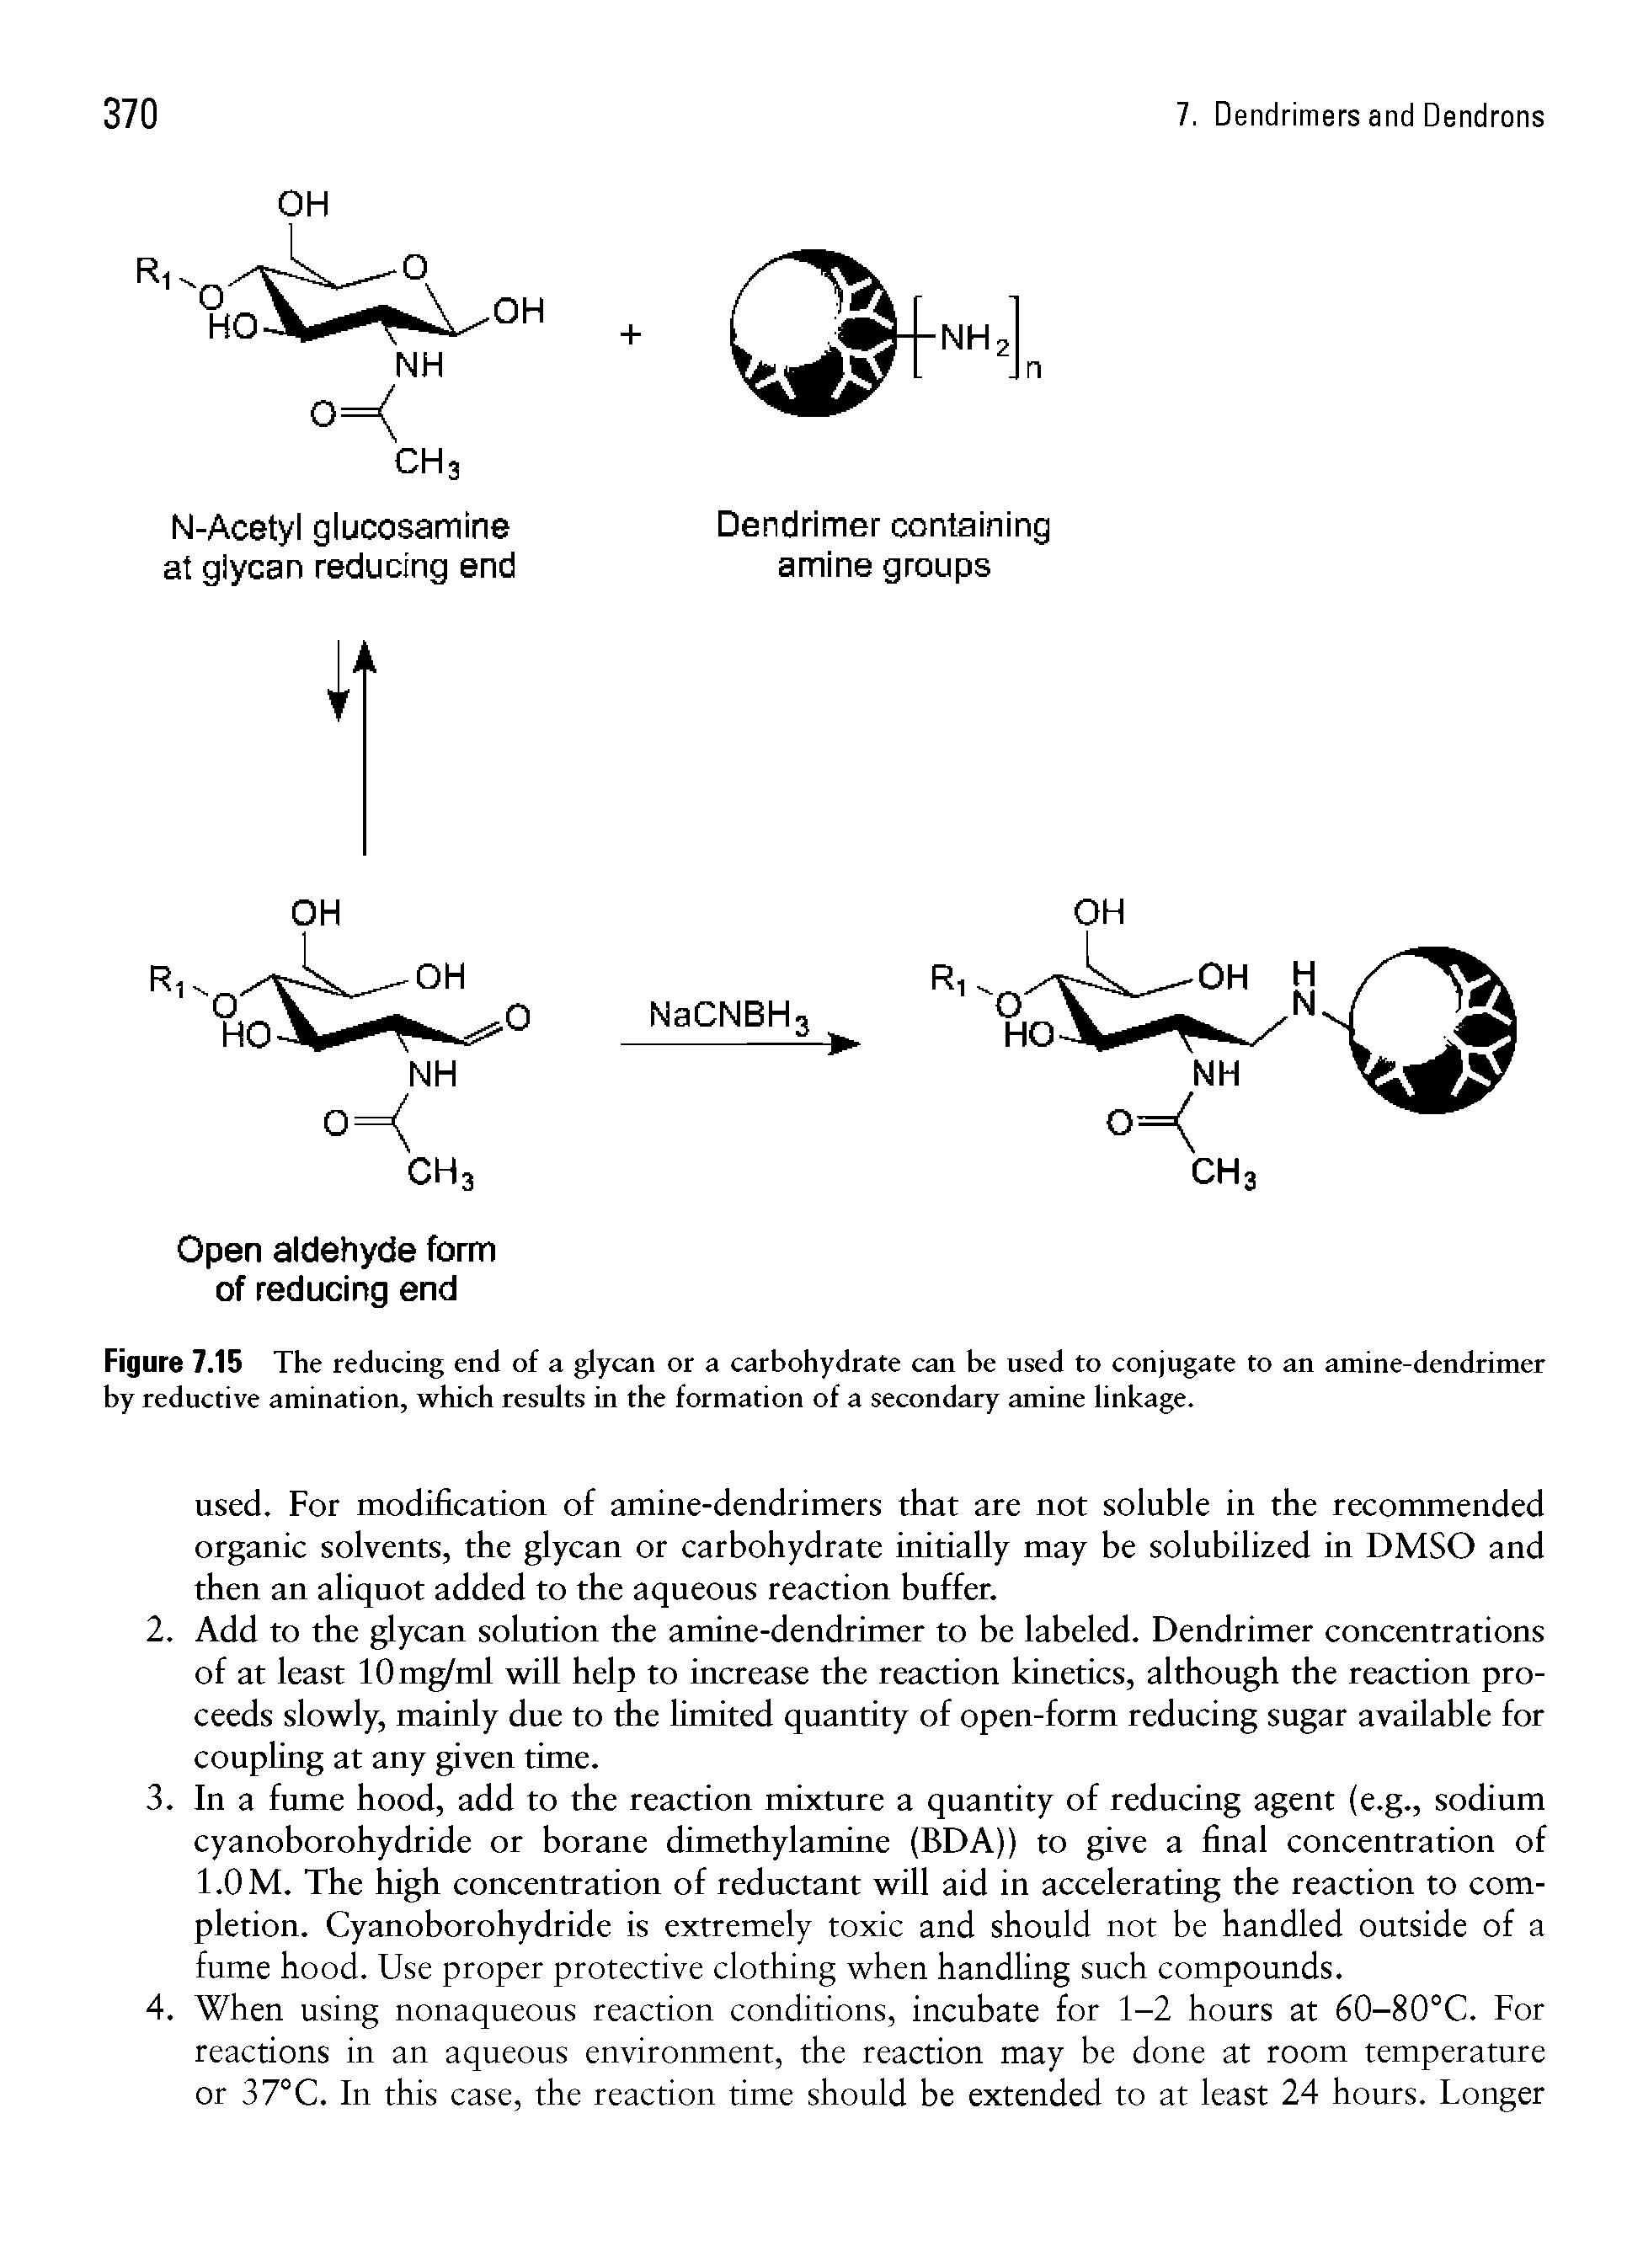 Figure 7.15 The reducing end of a glycan or a carbohydrate can be used to conjugate to an amine-dendrimer by reductive amination, which results in the formation of a secondary amine linkage.